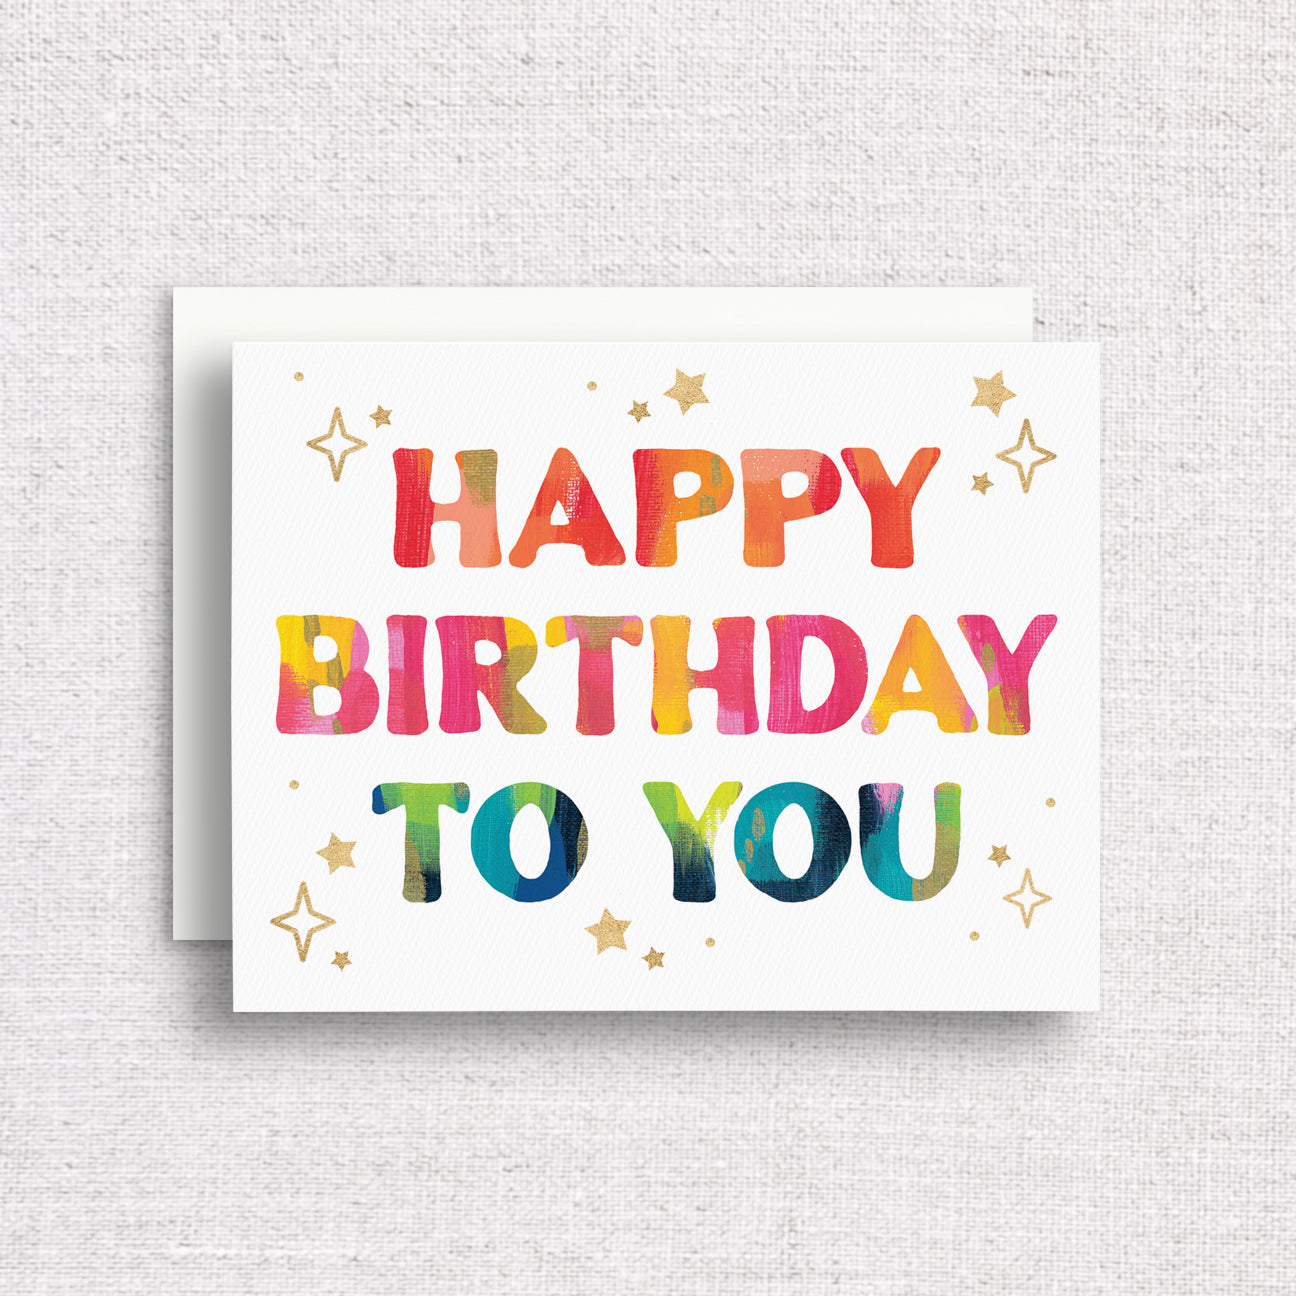 Starry Rainbow "Happy Birthday to You" Greeting Card by Gert & Co